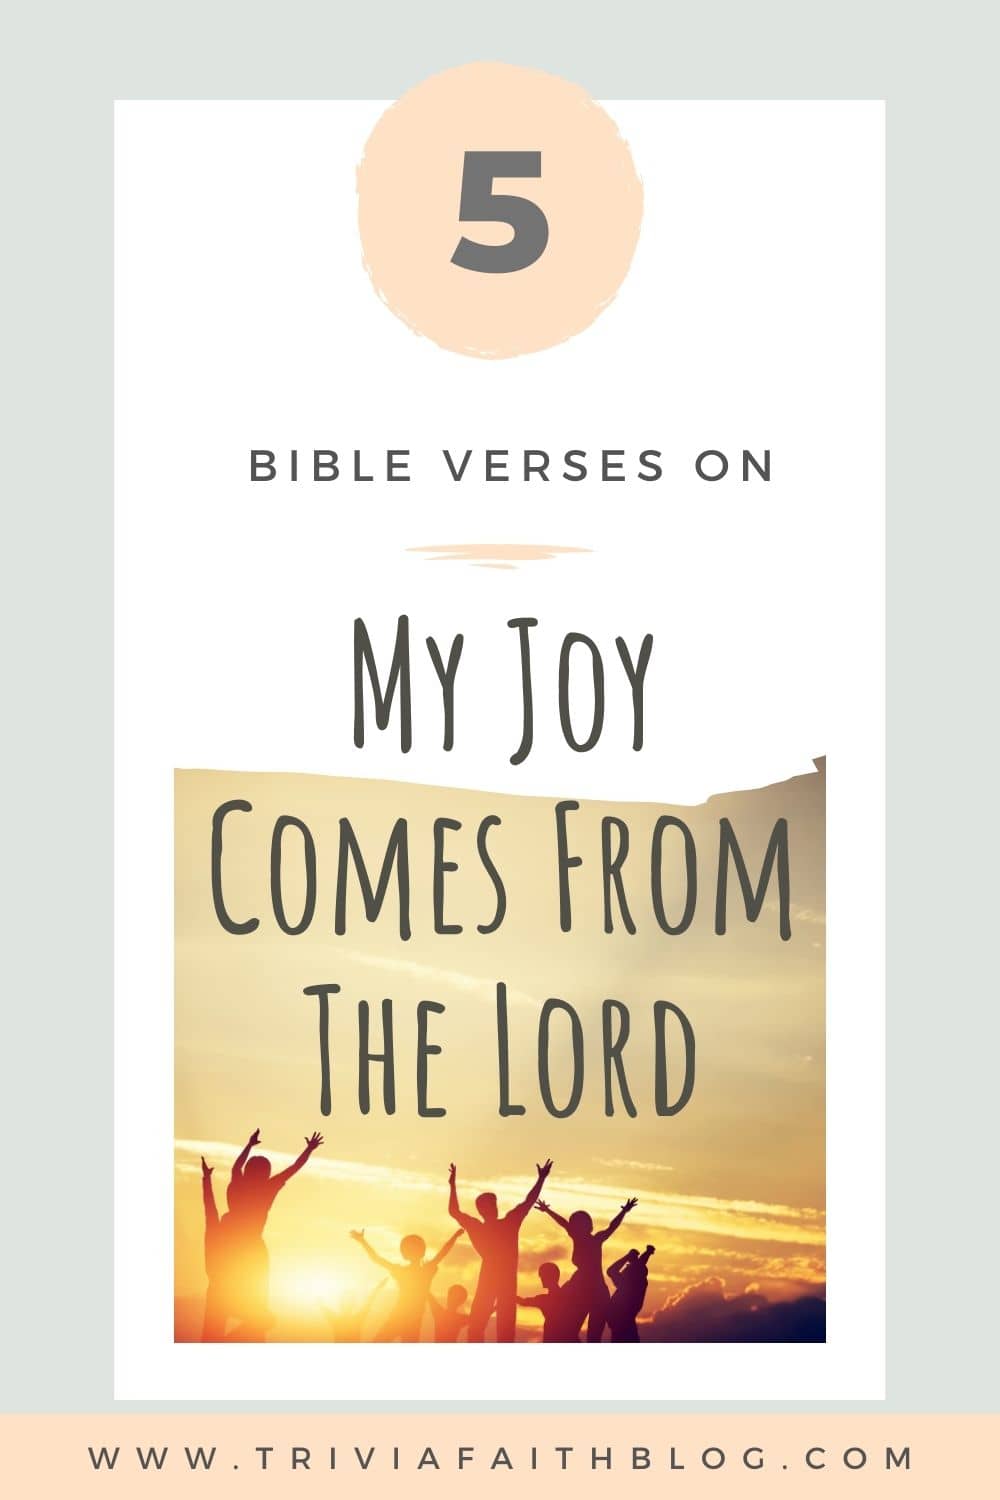 My joy comes from the Lord